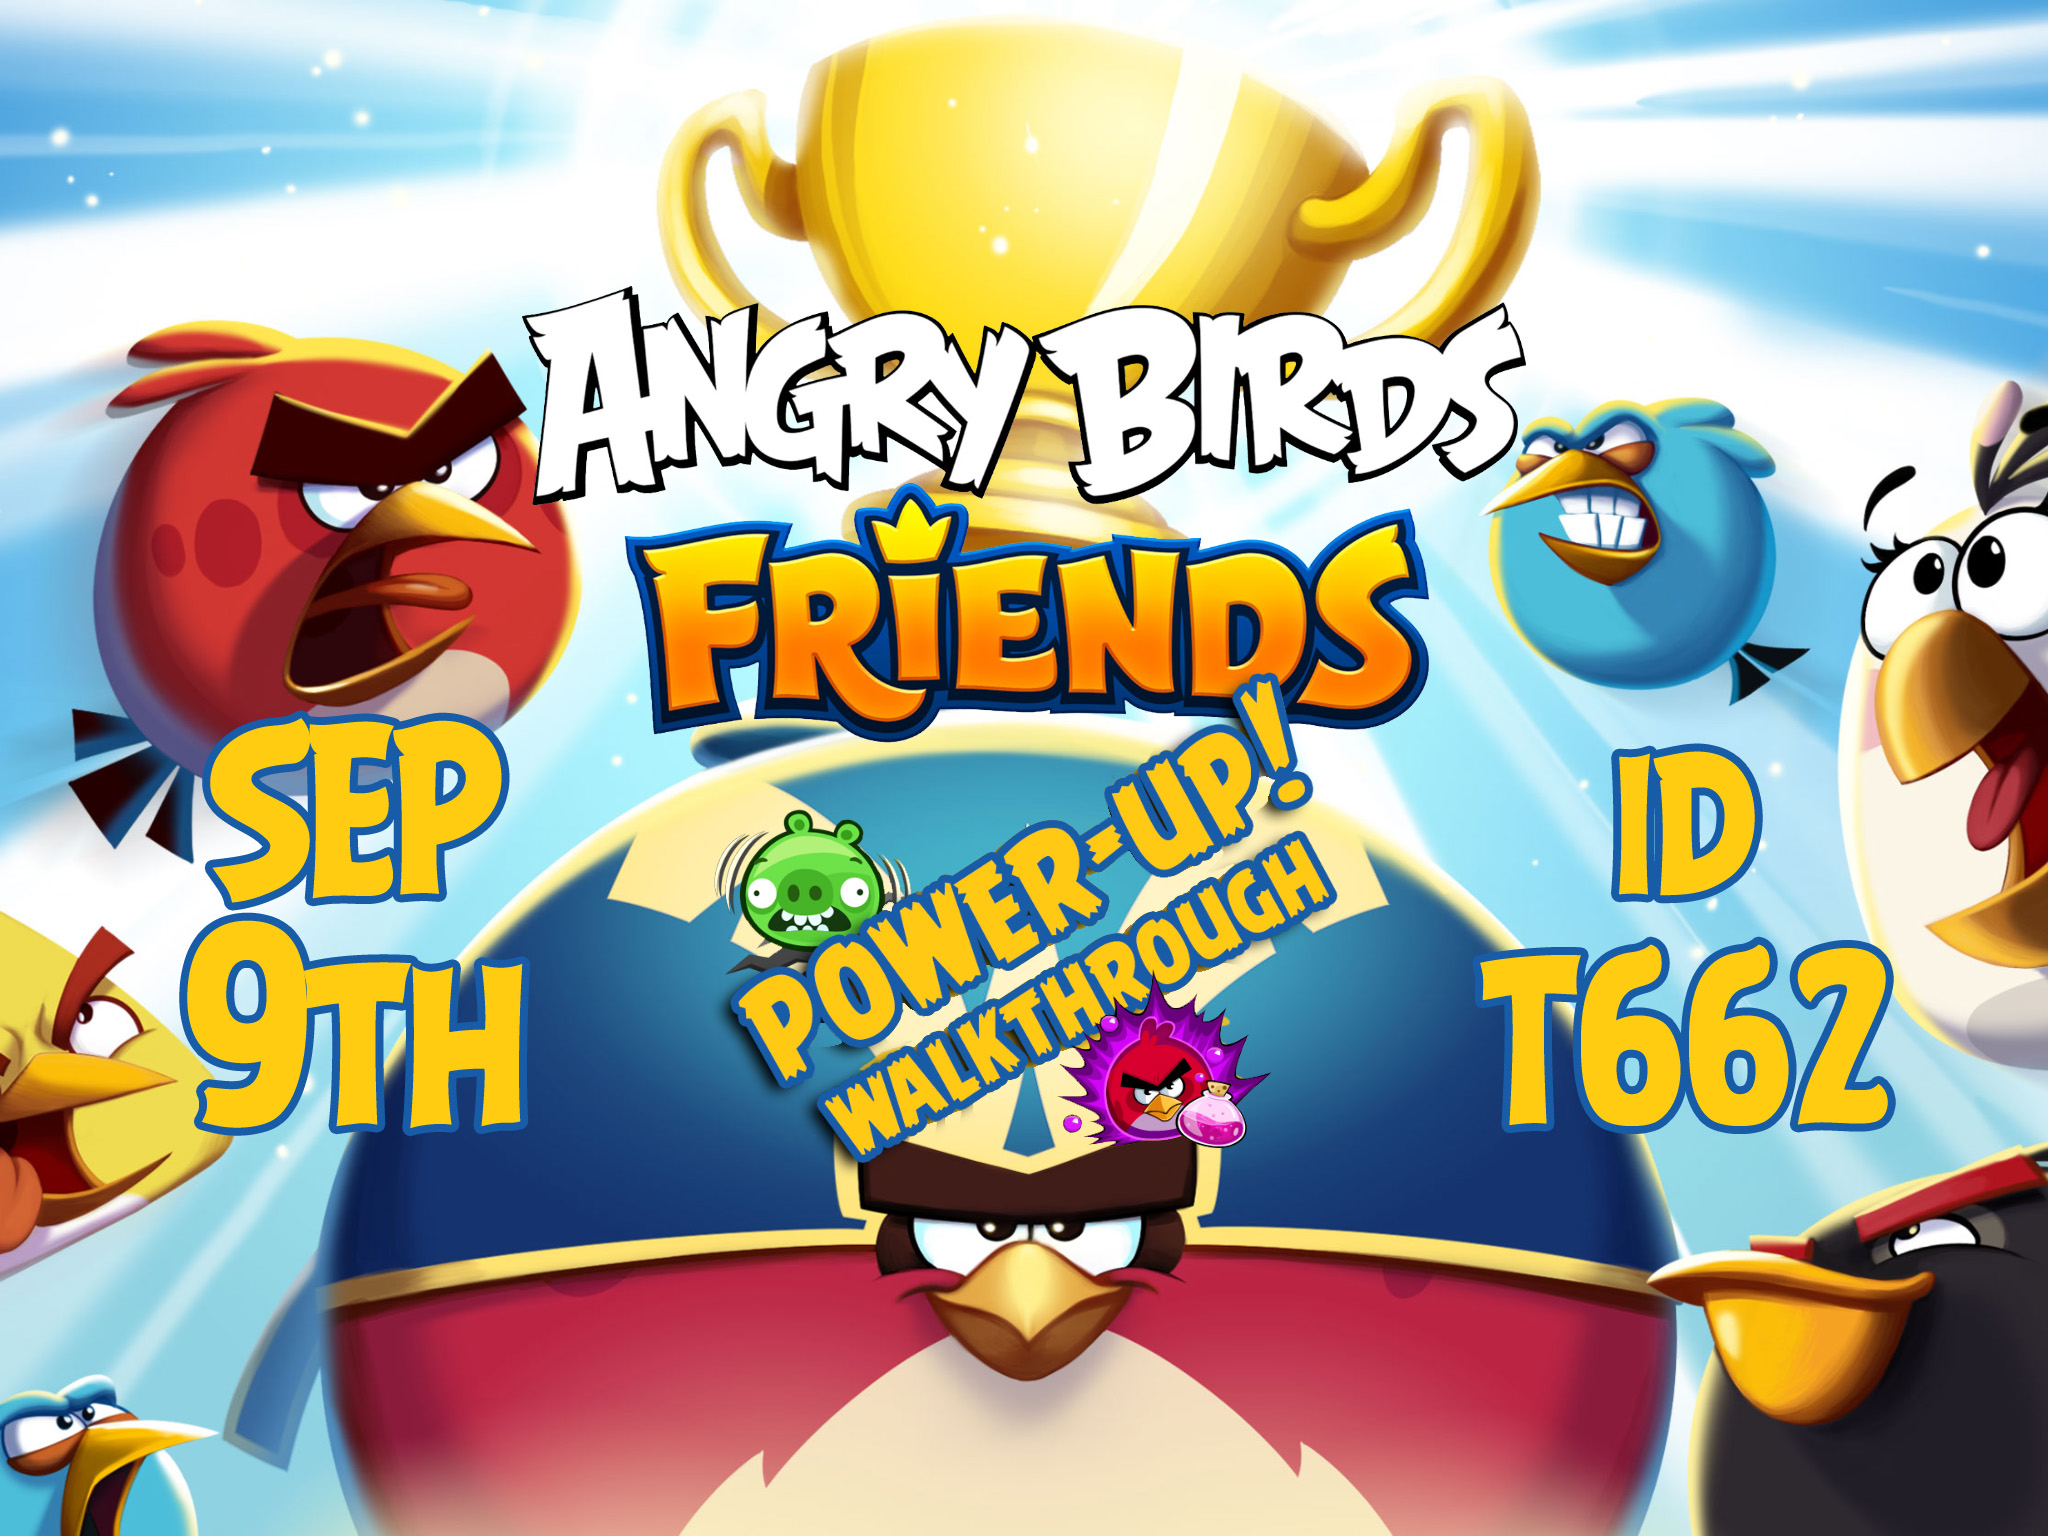 Angry-Birds-Friends-Tournament-T662-Feature-Image-PU